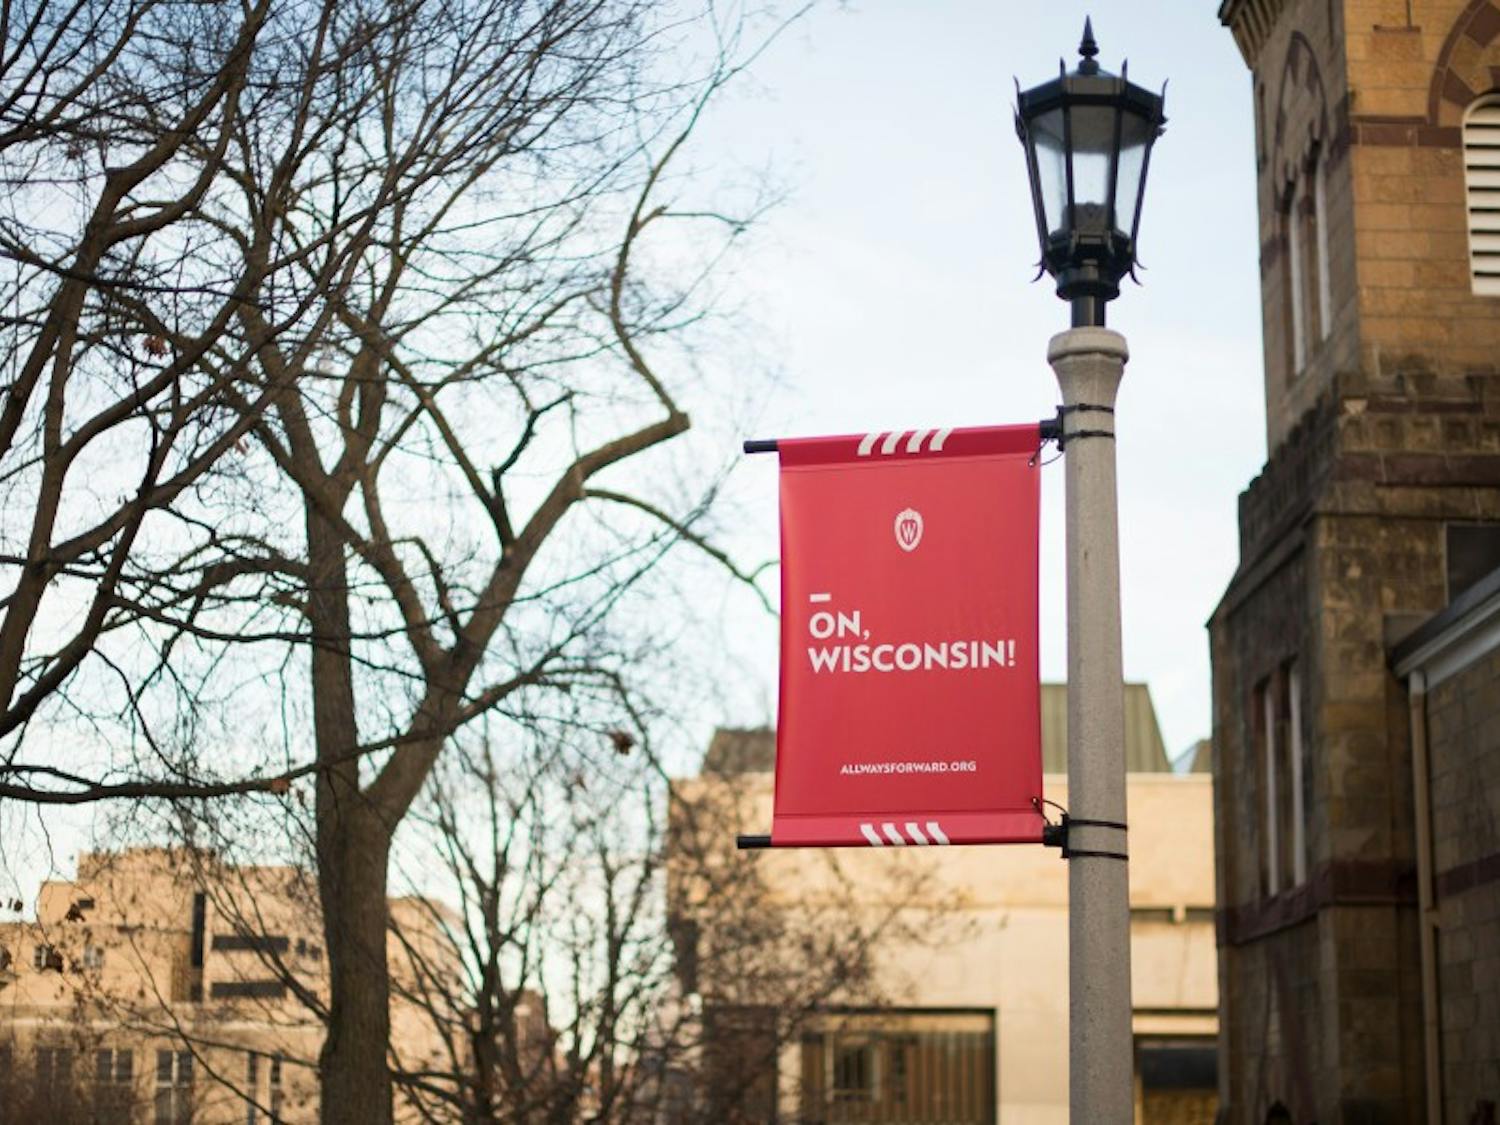 Chancellor Rebecca Blank approved full-funding through her office for Our Wisconsin, an inclusion program that will be offered to first-year students in residence hall.